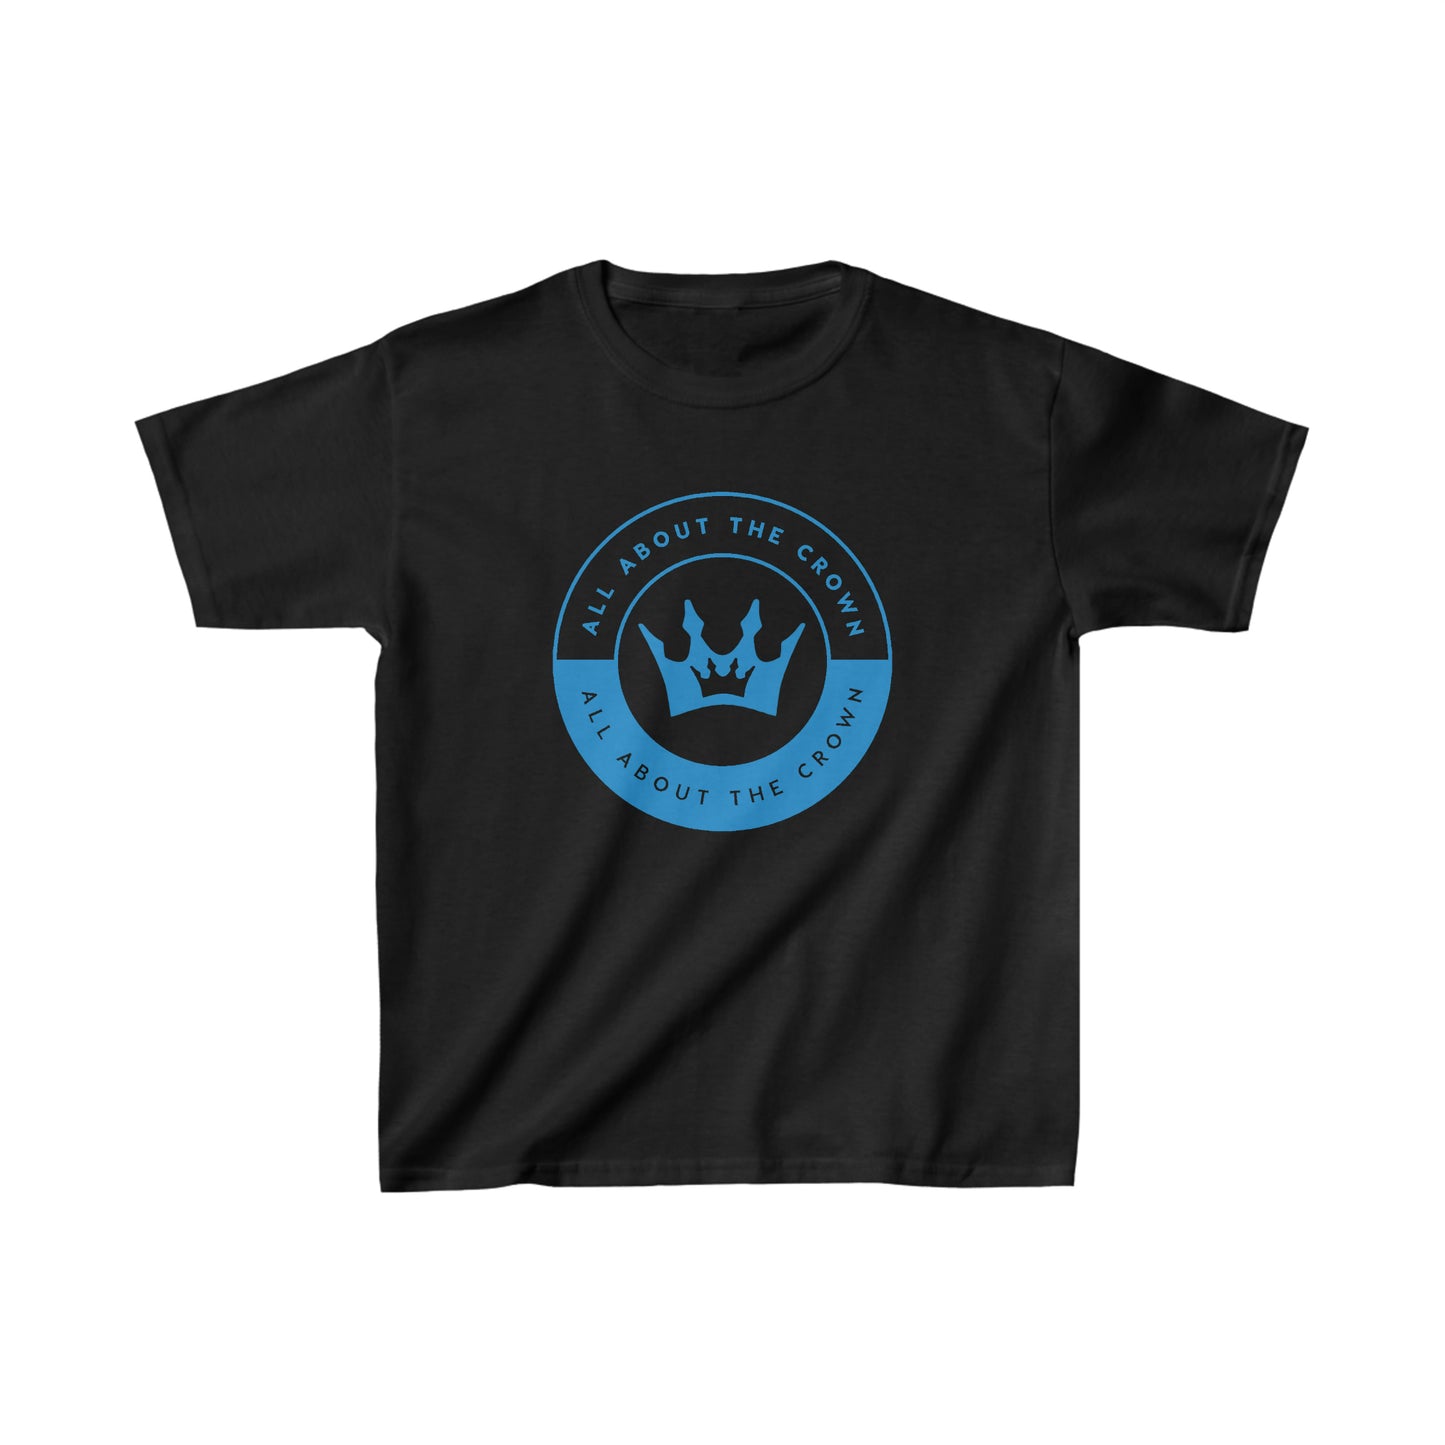 Kids "All About The Crown" Signature T-shirt